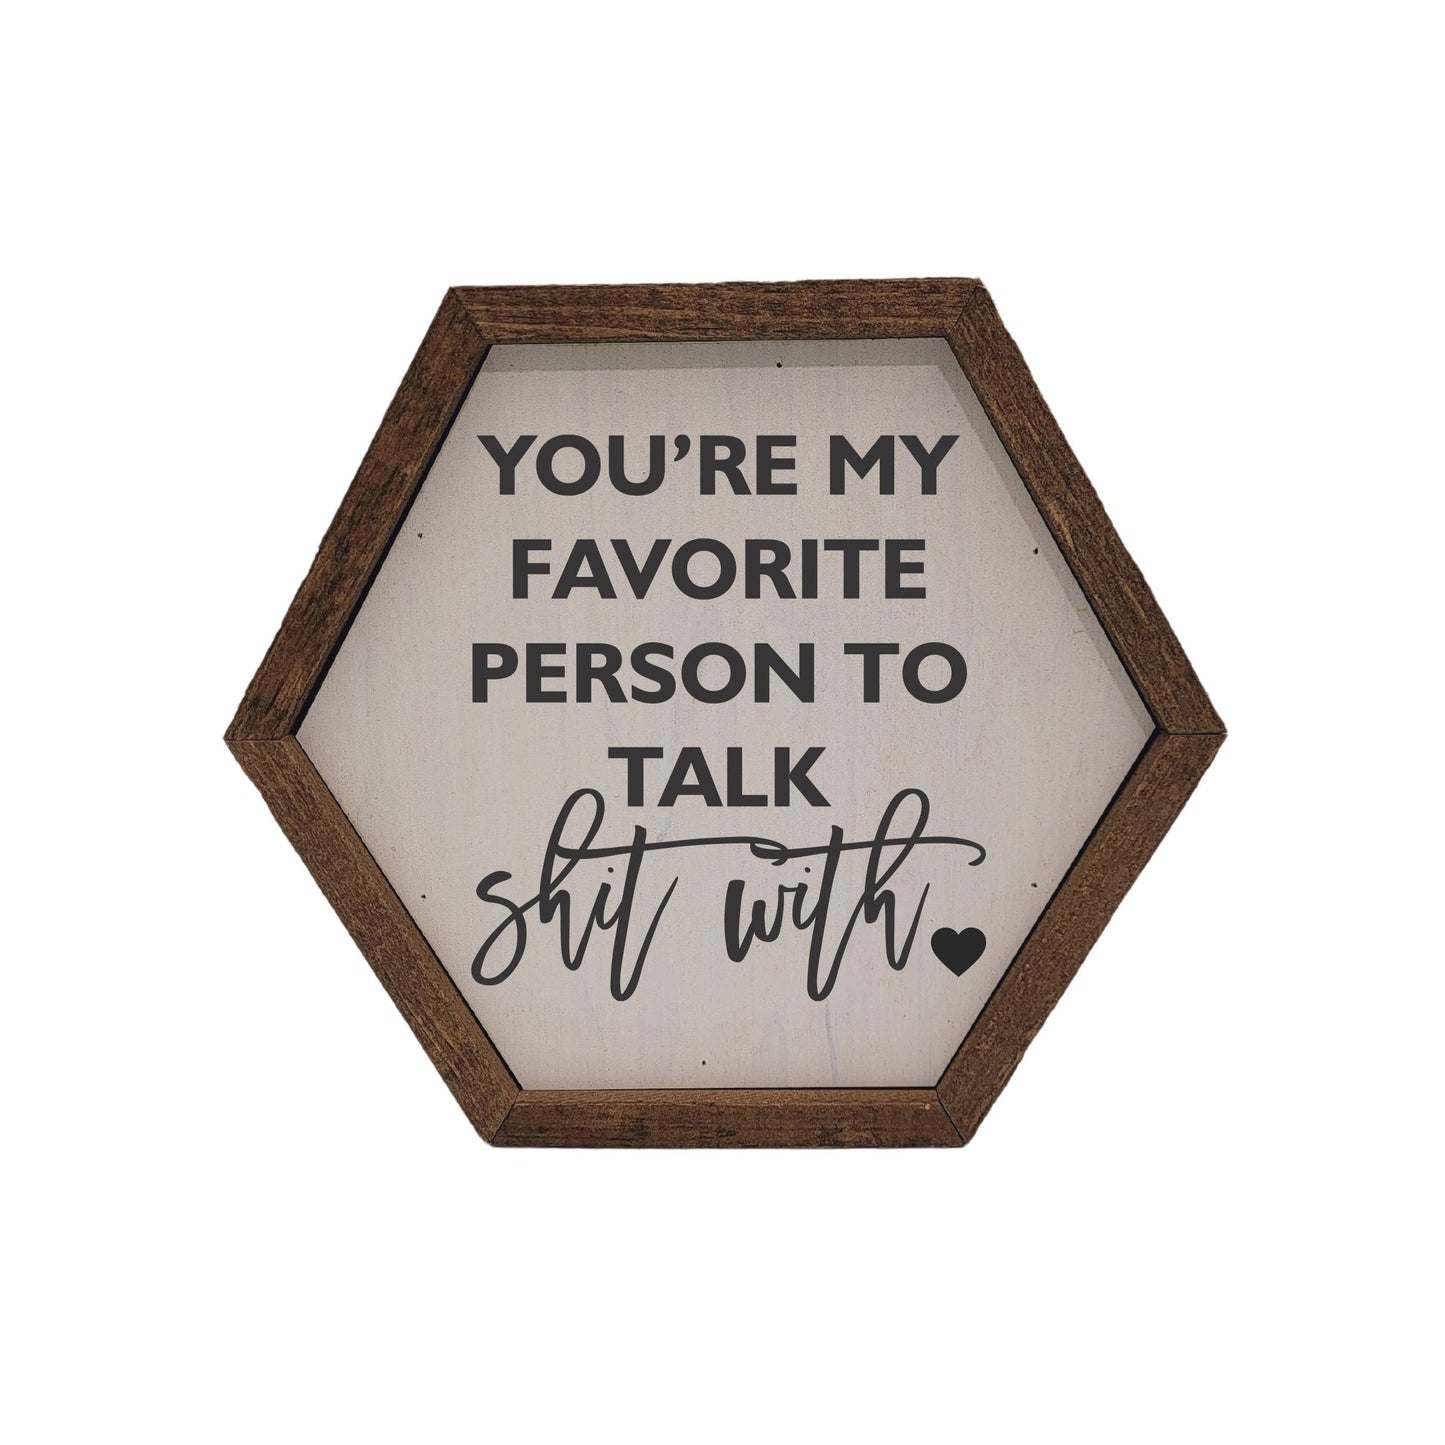 "You're my favorite person" Hexagon Sign